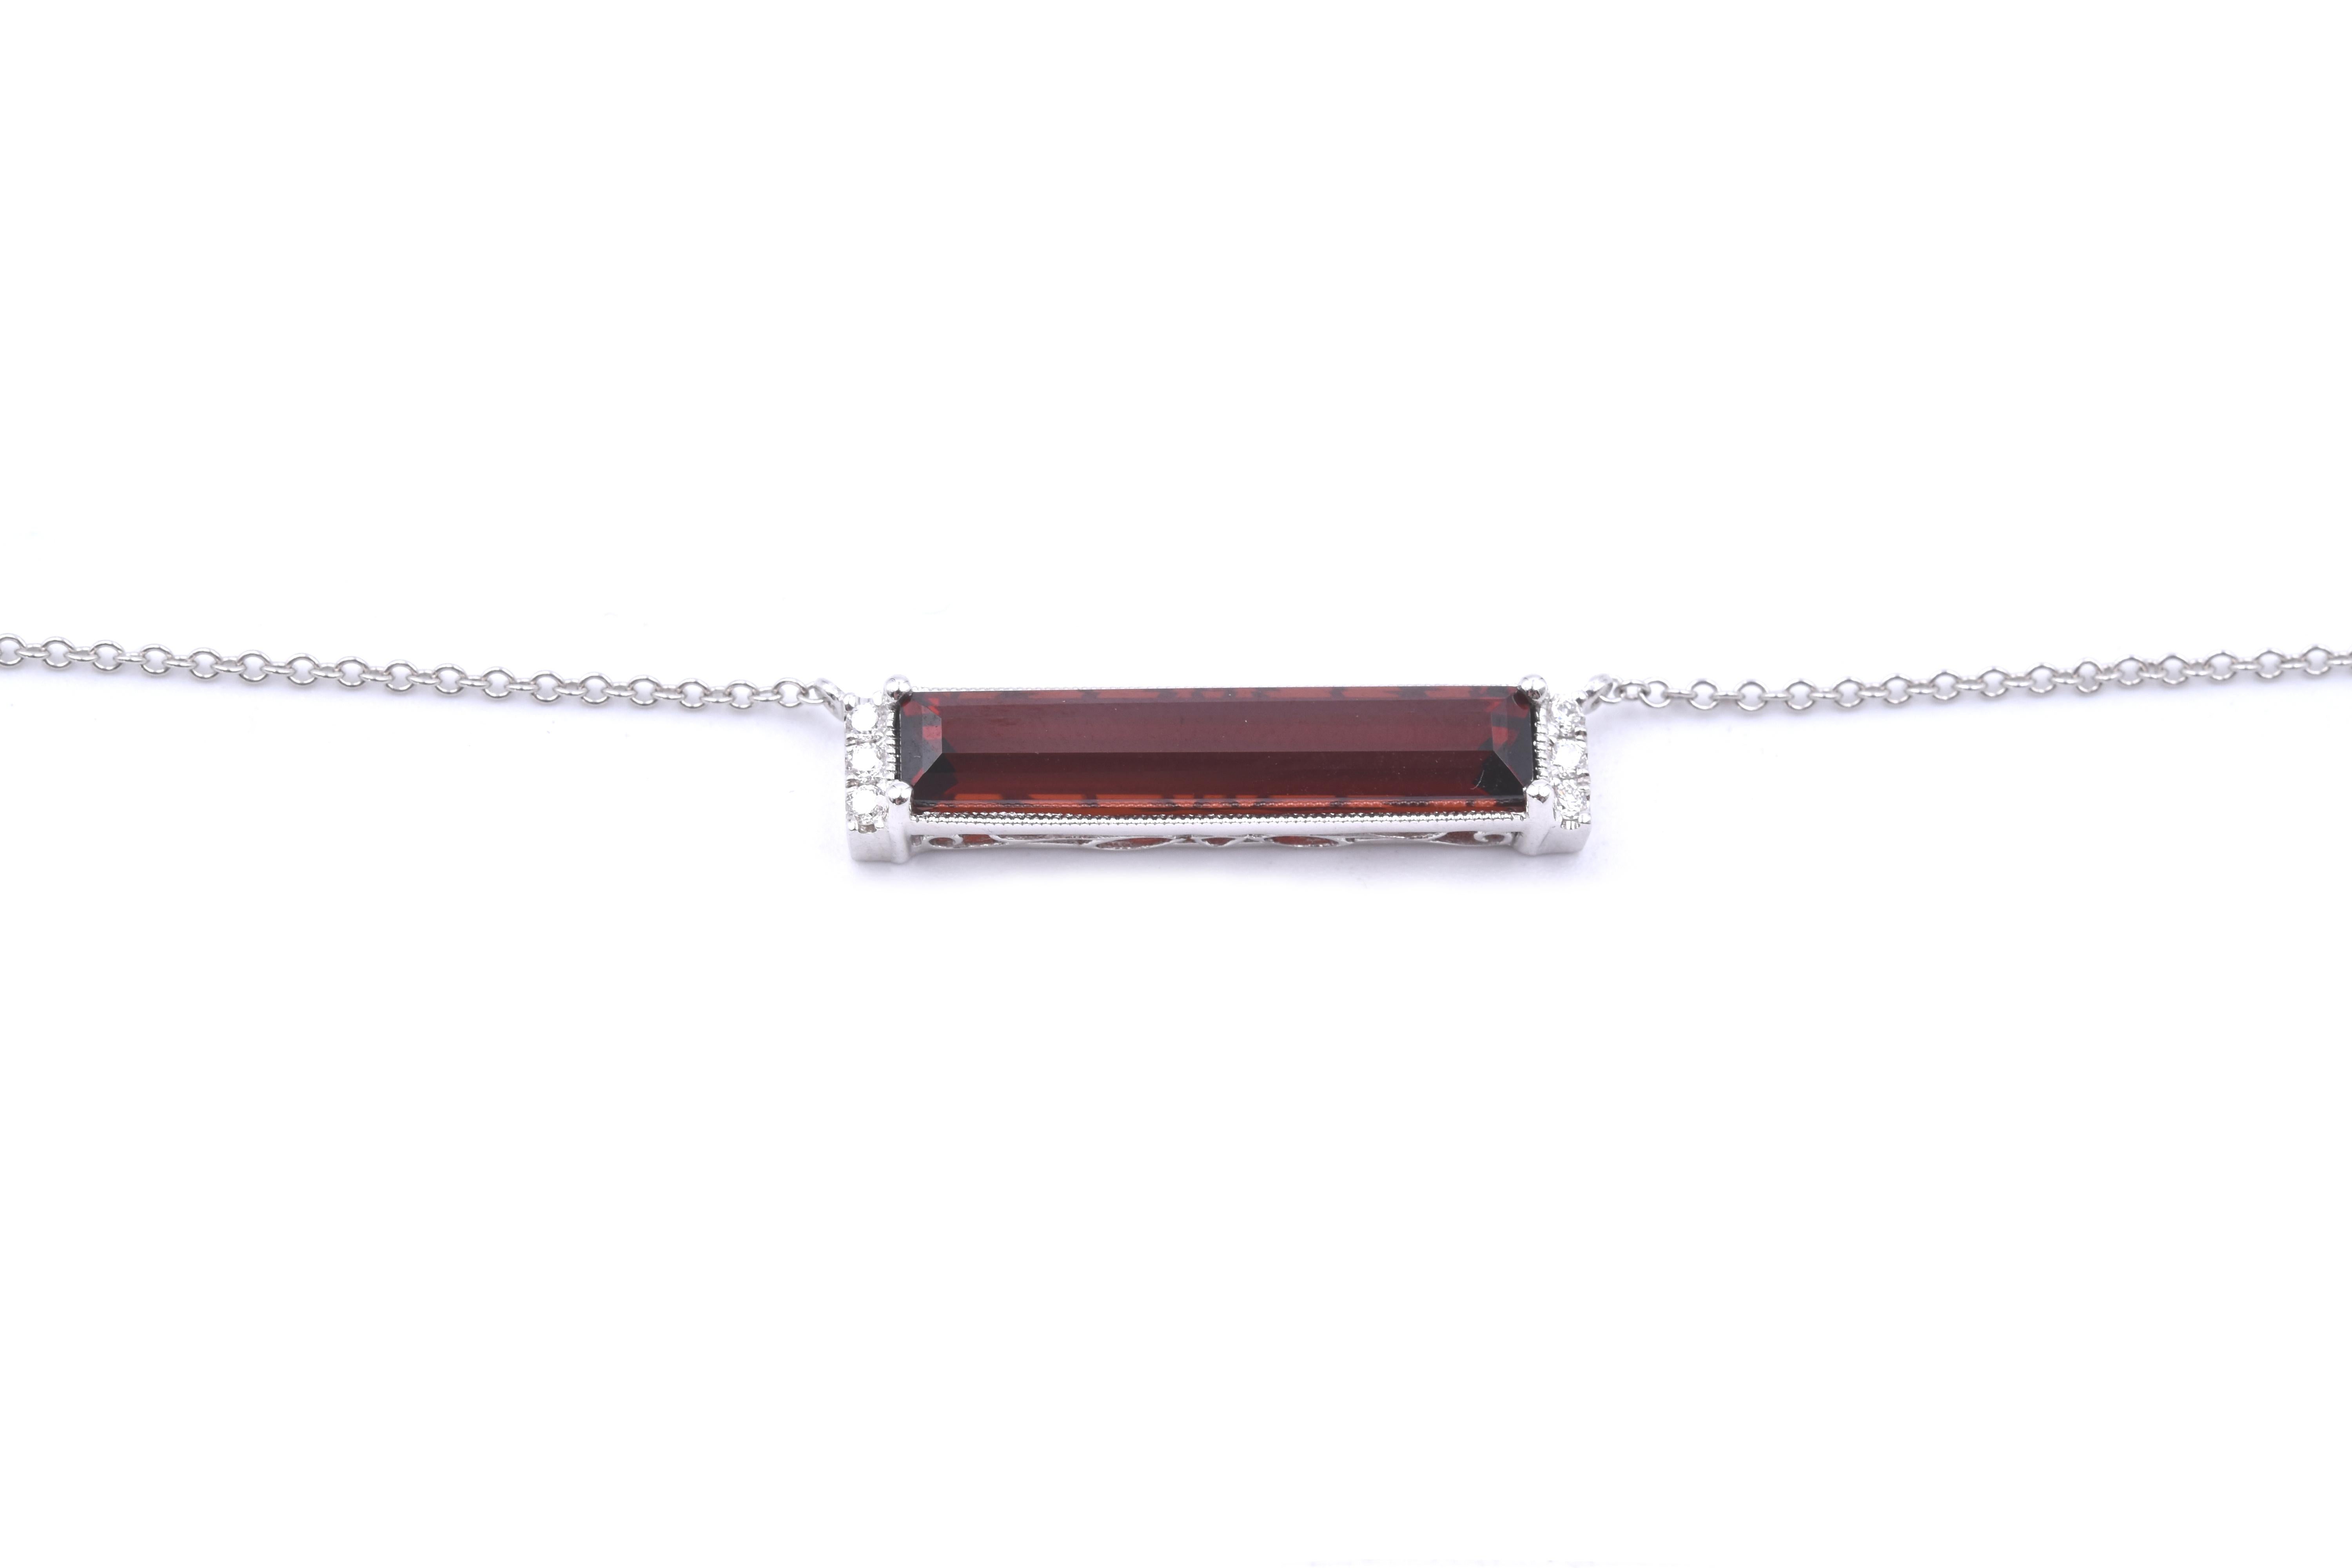 Designer: The Estate Watch and Jewelry
Material: 14k white gold
Garnet: 1 emerald cut garnet = 3.75ct
Diamonds: 6 round brilliant cuts = 0.09cttw
Dimensions: necklace is 17-inches in length
Weight: 3.42 grams
